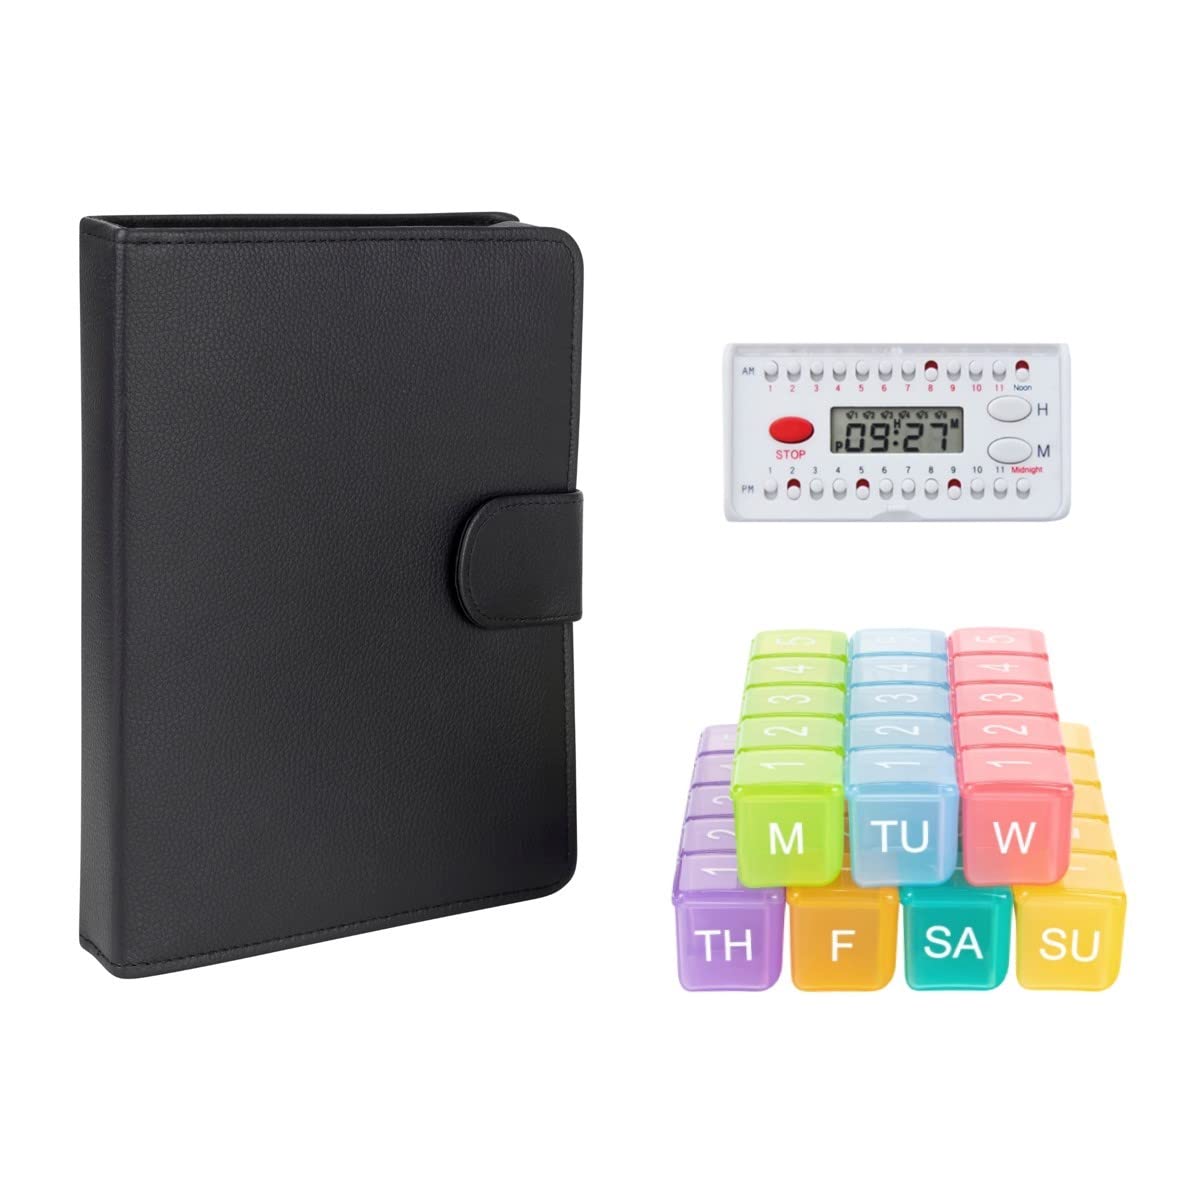 e-Pill 5 Times a Day x 7 Day Large Weekly Pill Organizer - with Discreet Case and Reminder